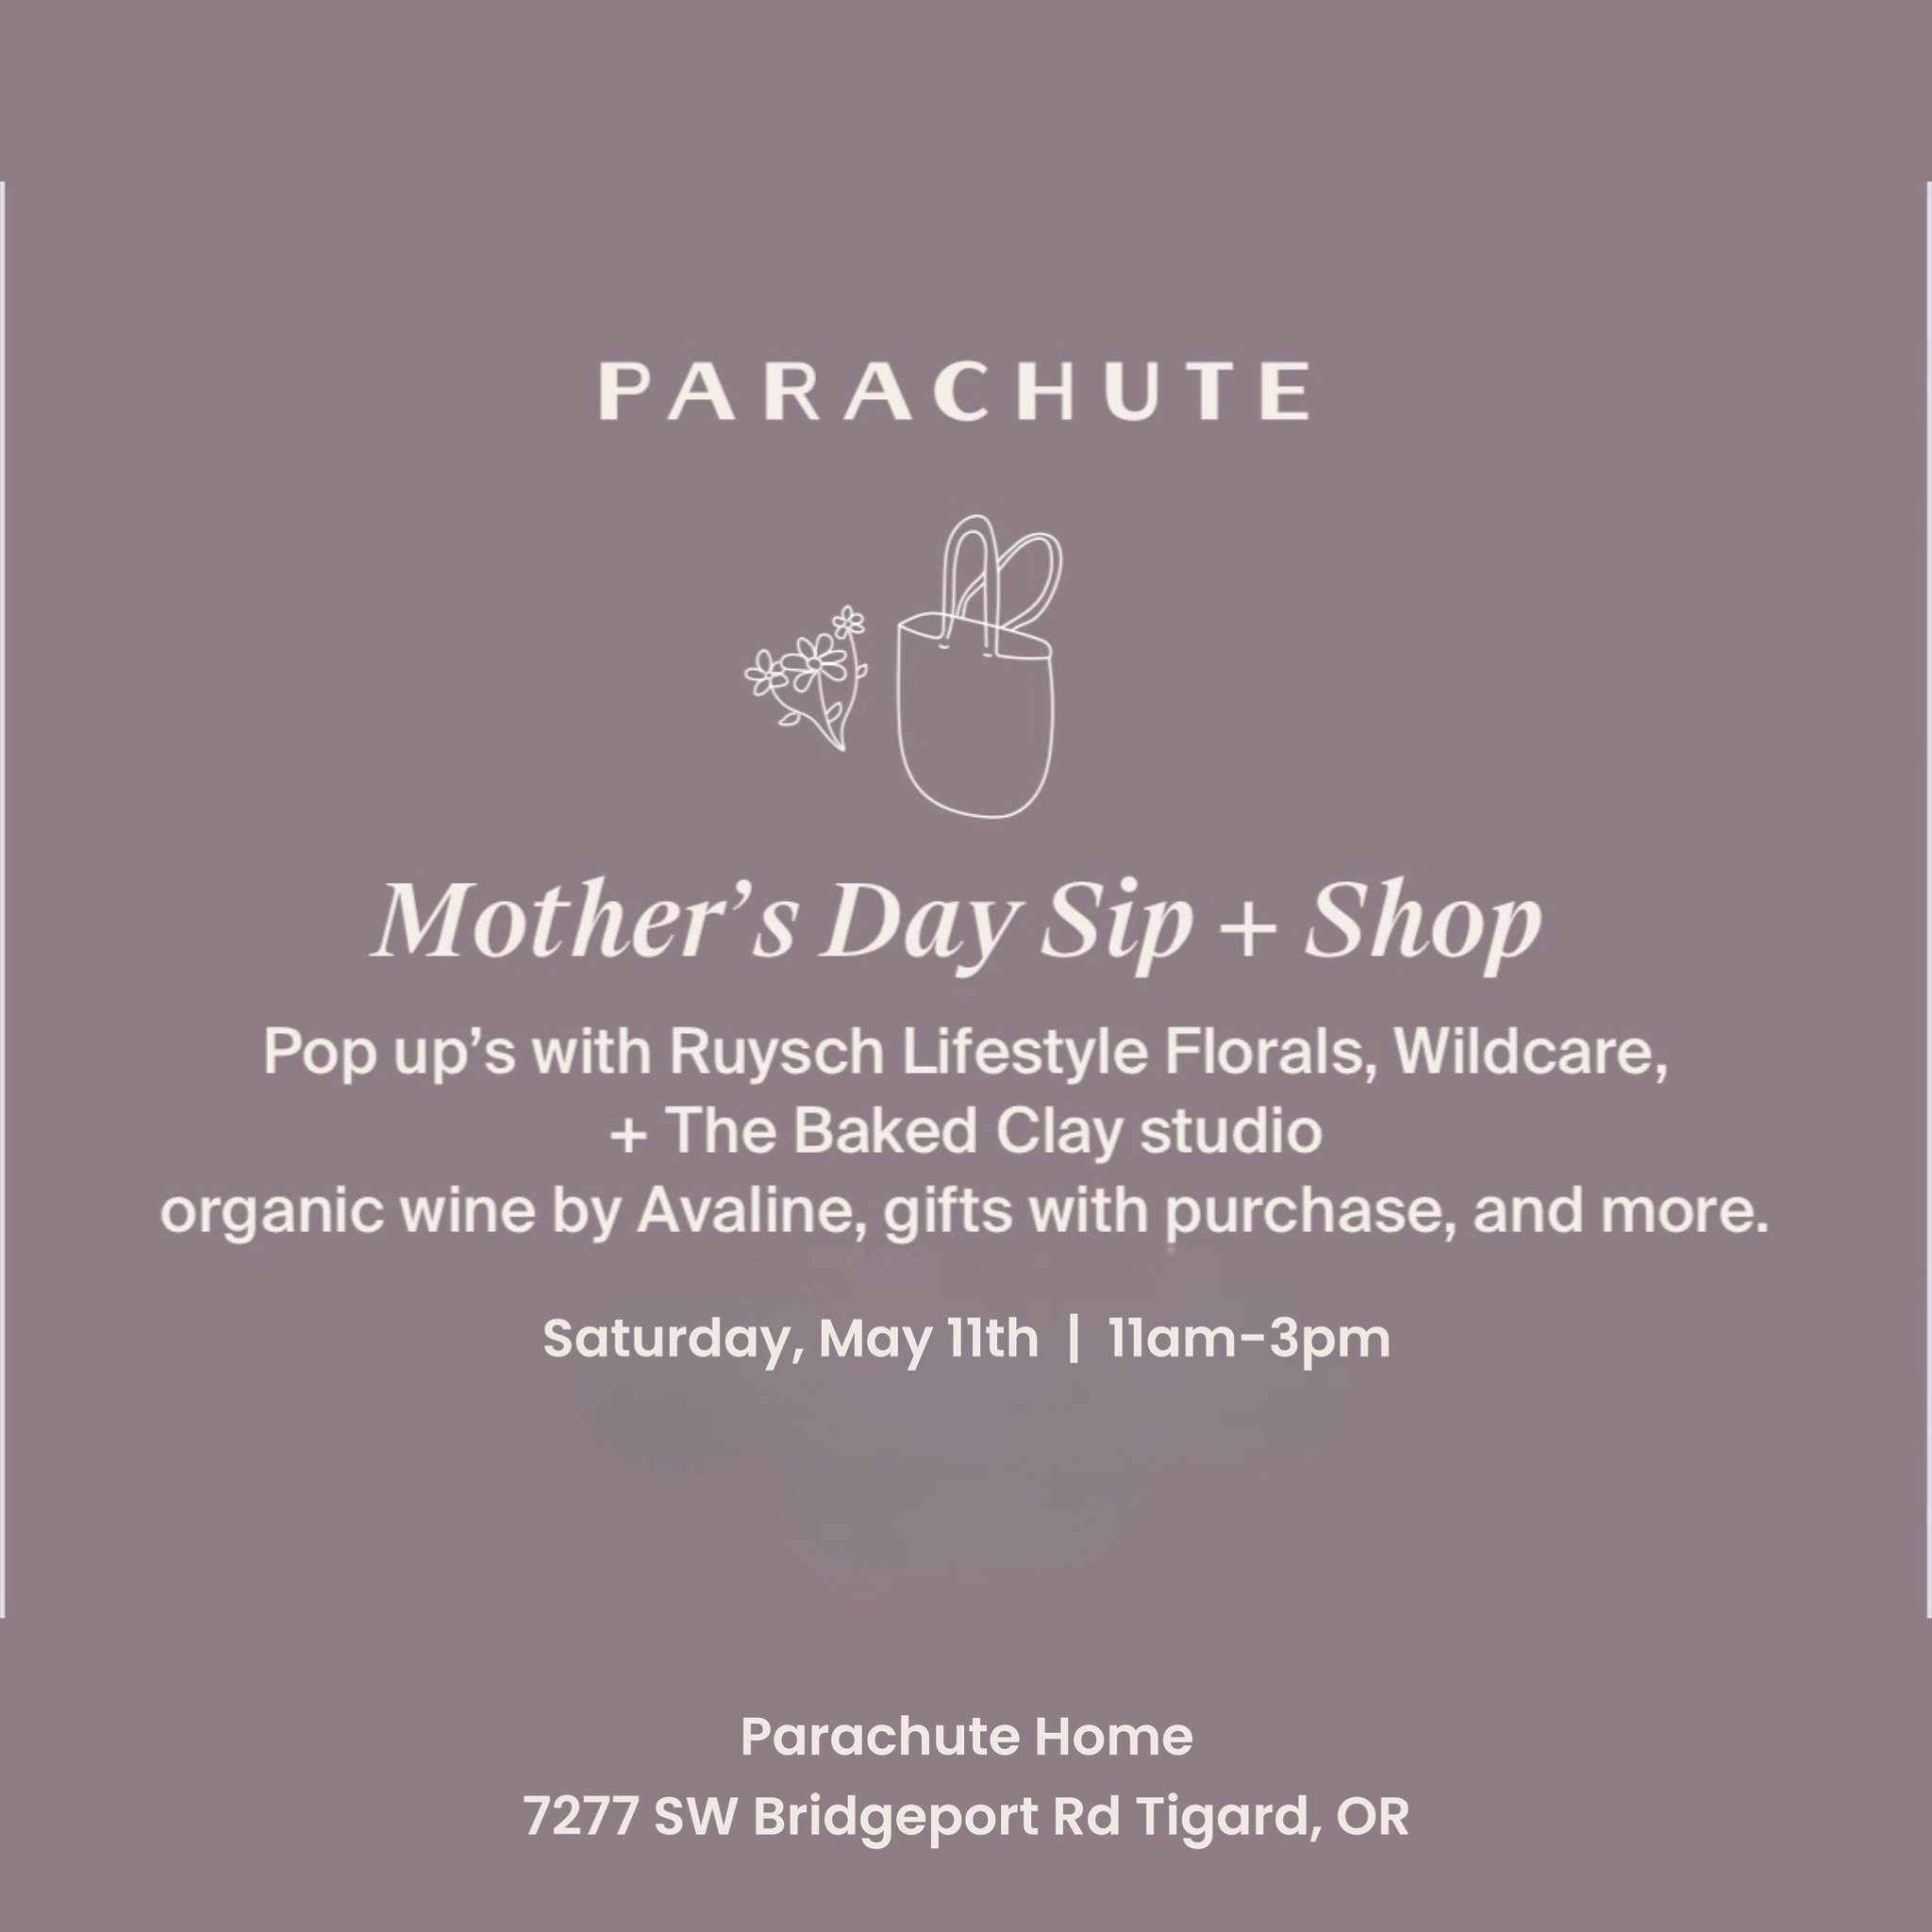 COME MEET US ON MAY 11th! 🍡
Hi friends,
It would be my pleasure to meet you in person!! It&rsquo;s been years since I&rsquo;ve done a pop-up event &amp; was recently approached by our local @parachutehome to join their Mother&rsquo;s Day sip &amp; s